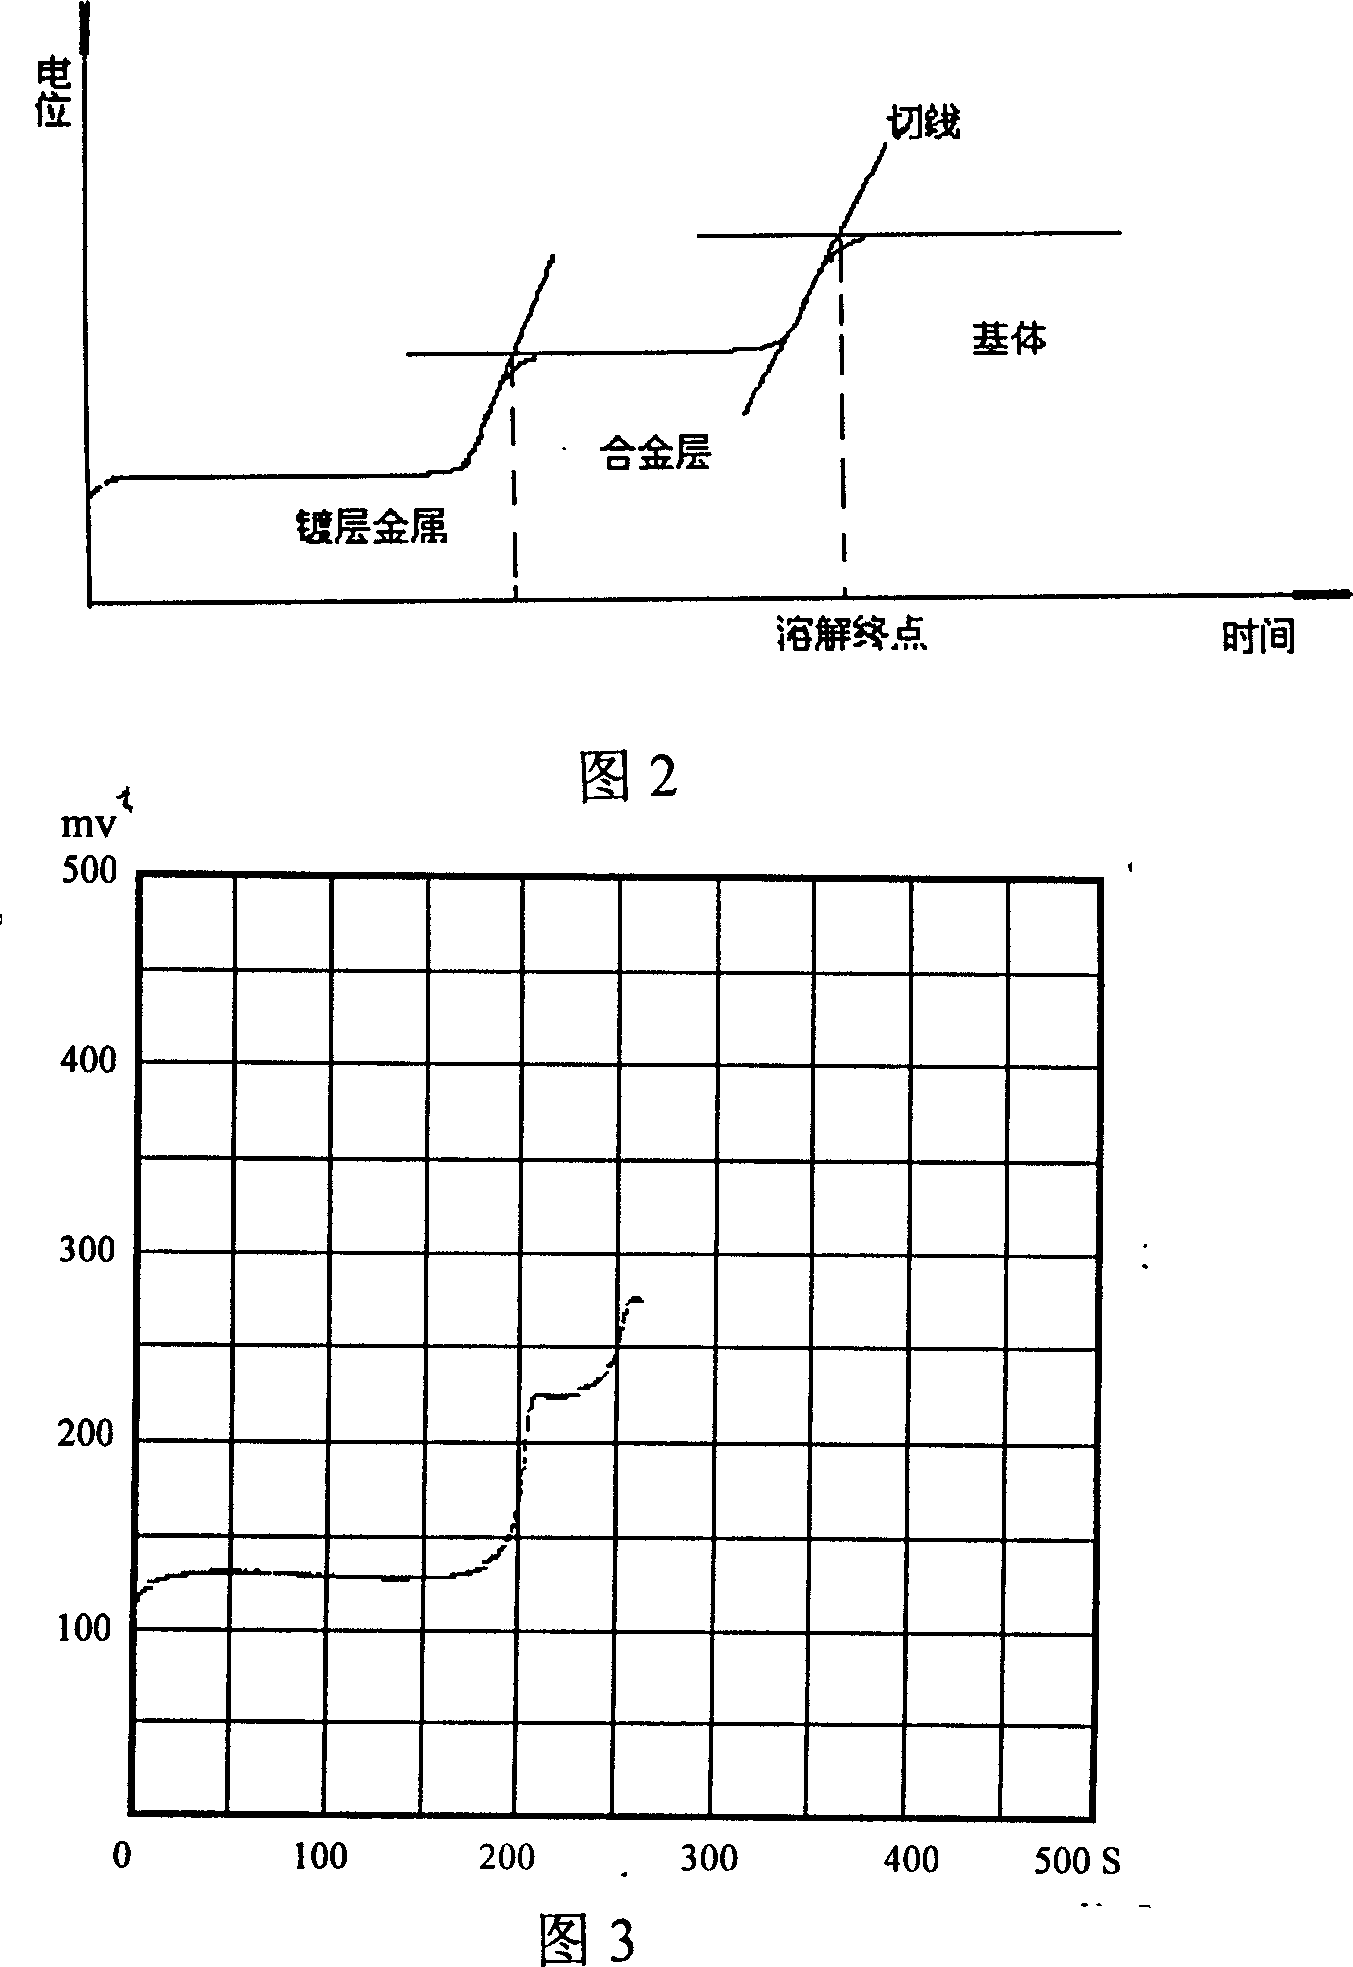 Method for measuring plate coating metal weight